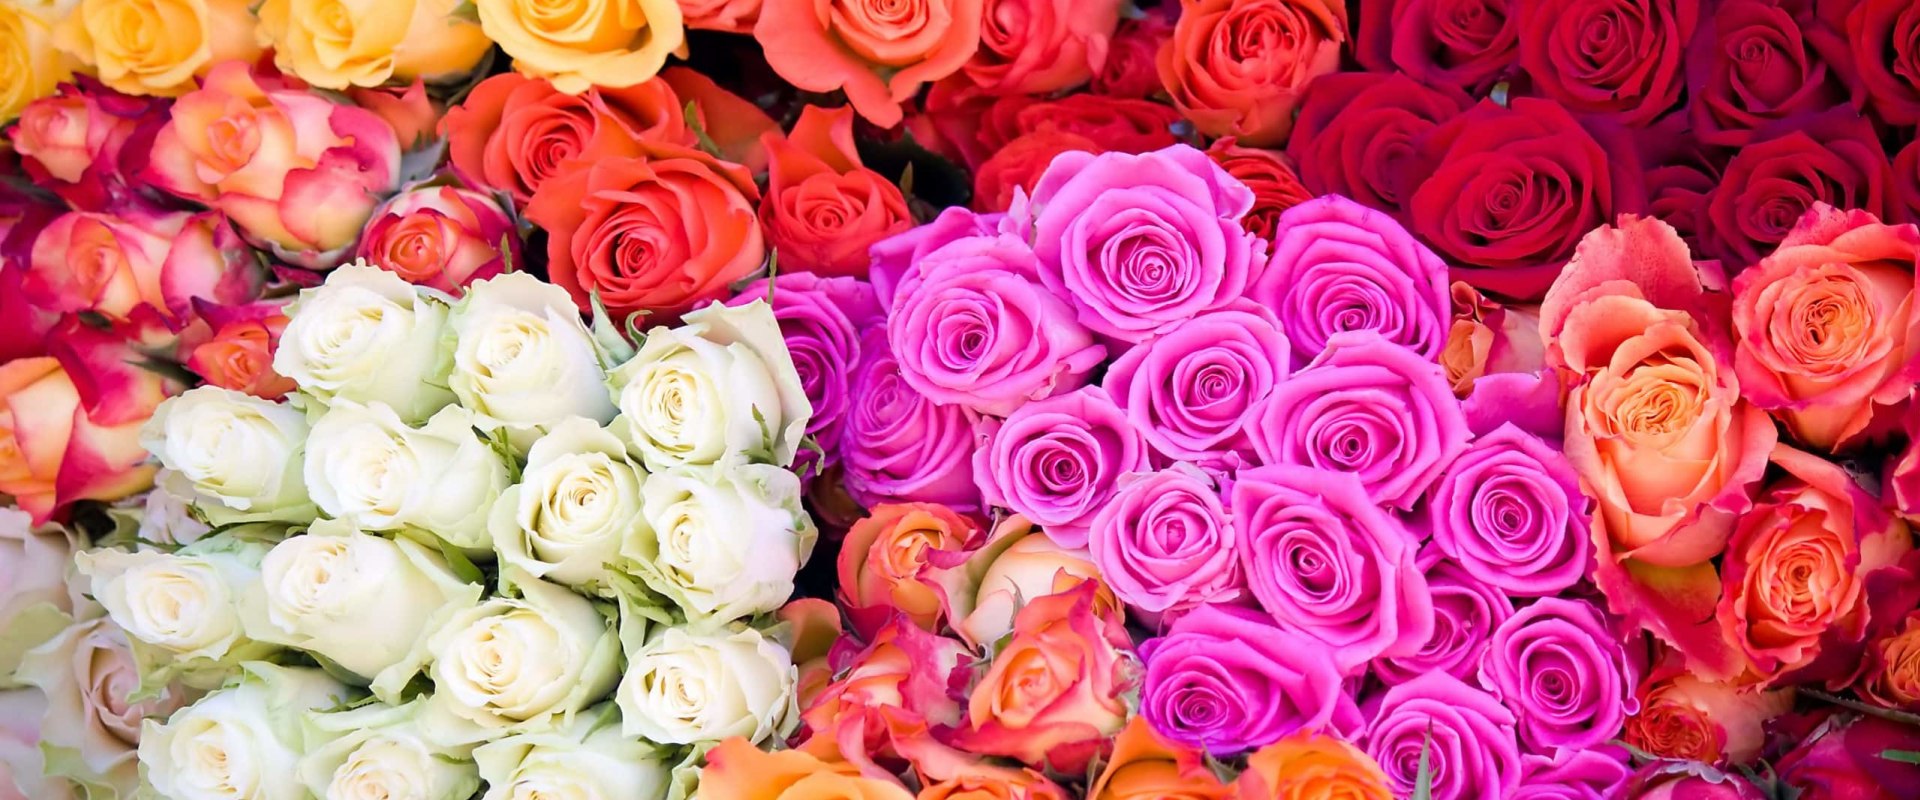 Is it cheaper to buy flowers from a wholesaler?